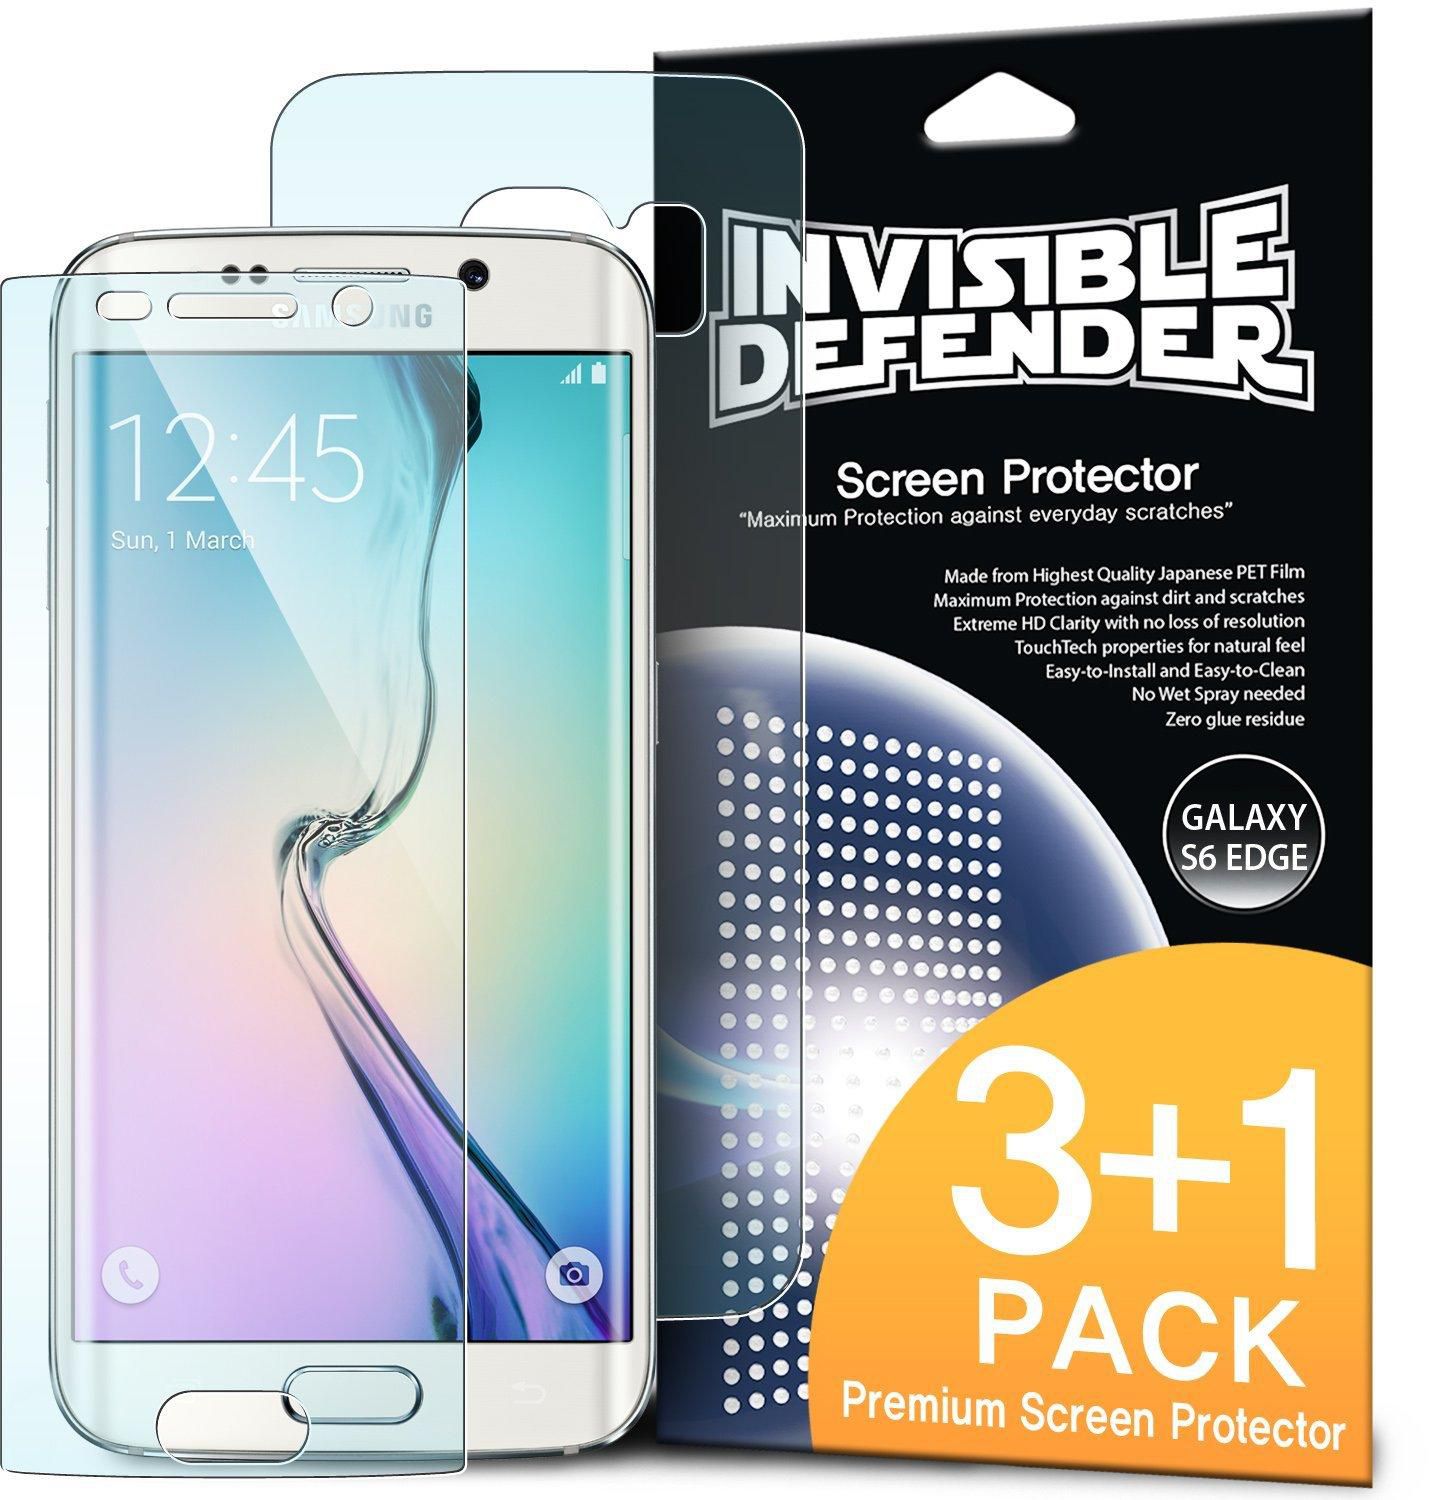 Rearth Pack of 4 HD Clarity Invisible Defender Screen Guard for Samsung Galaxy S6 EDGE